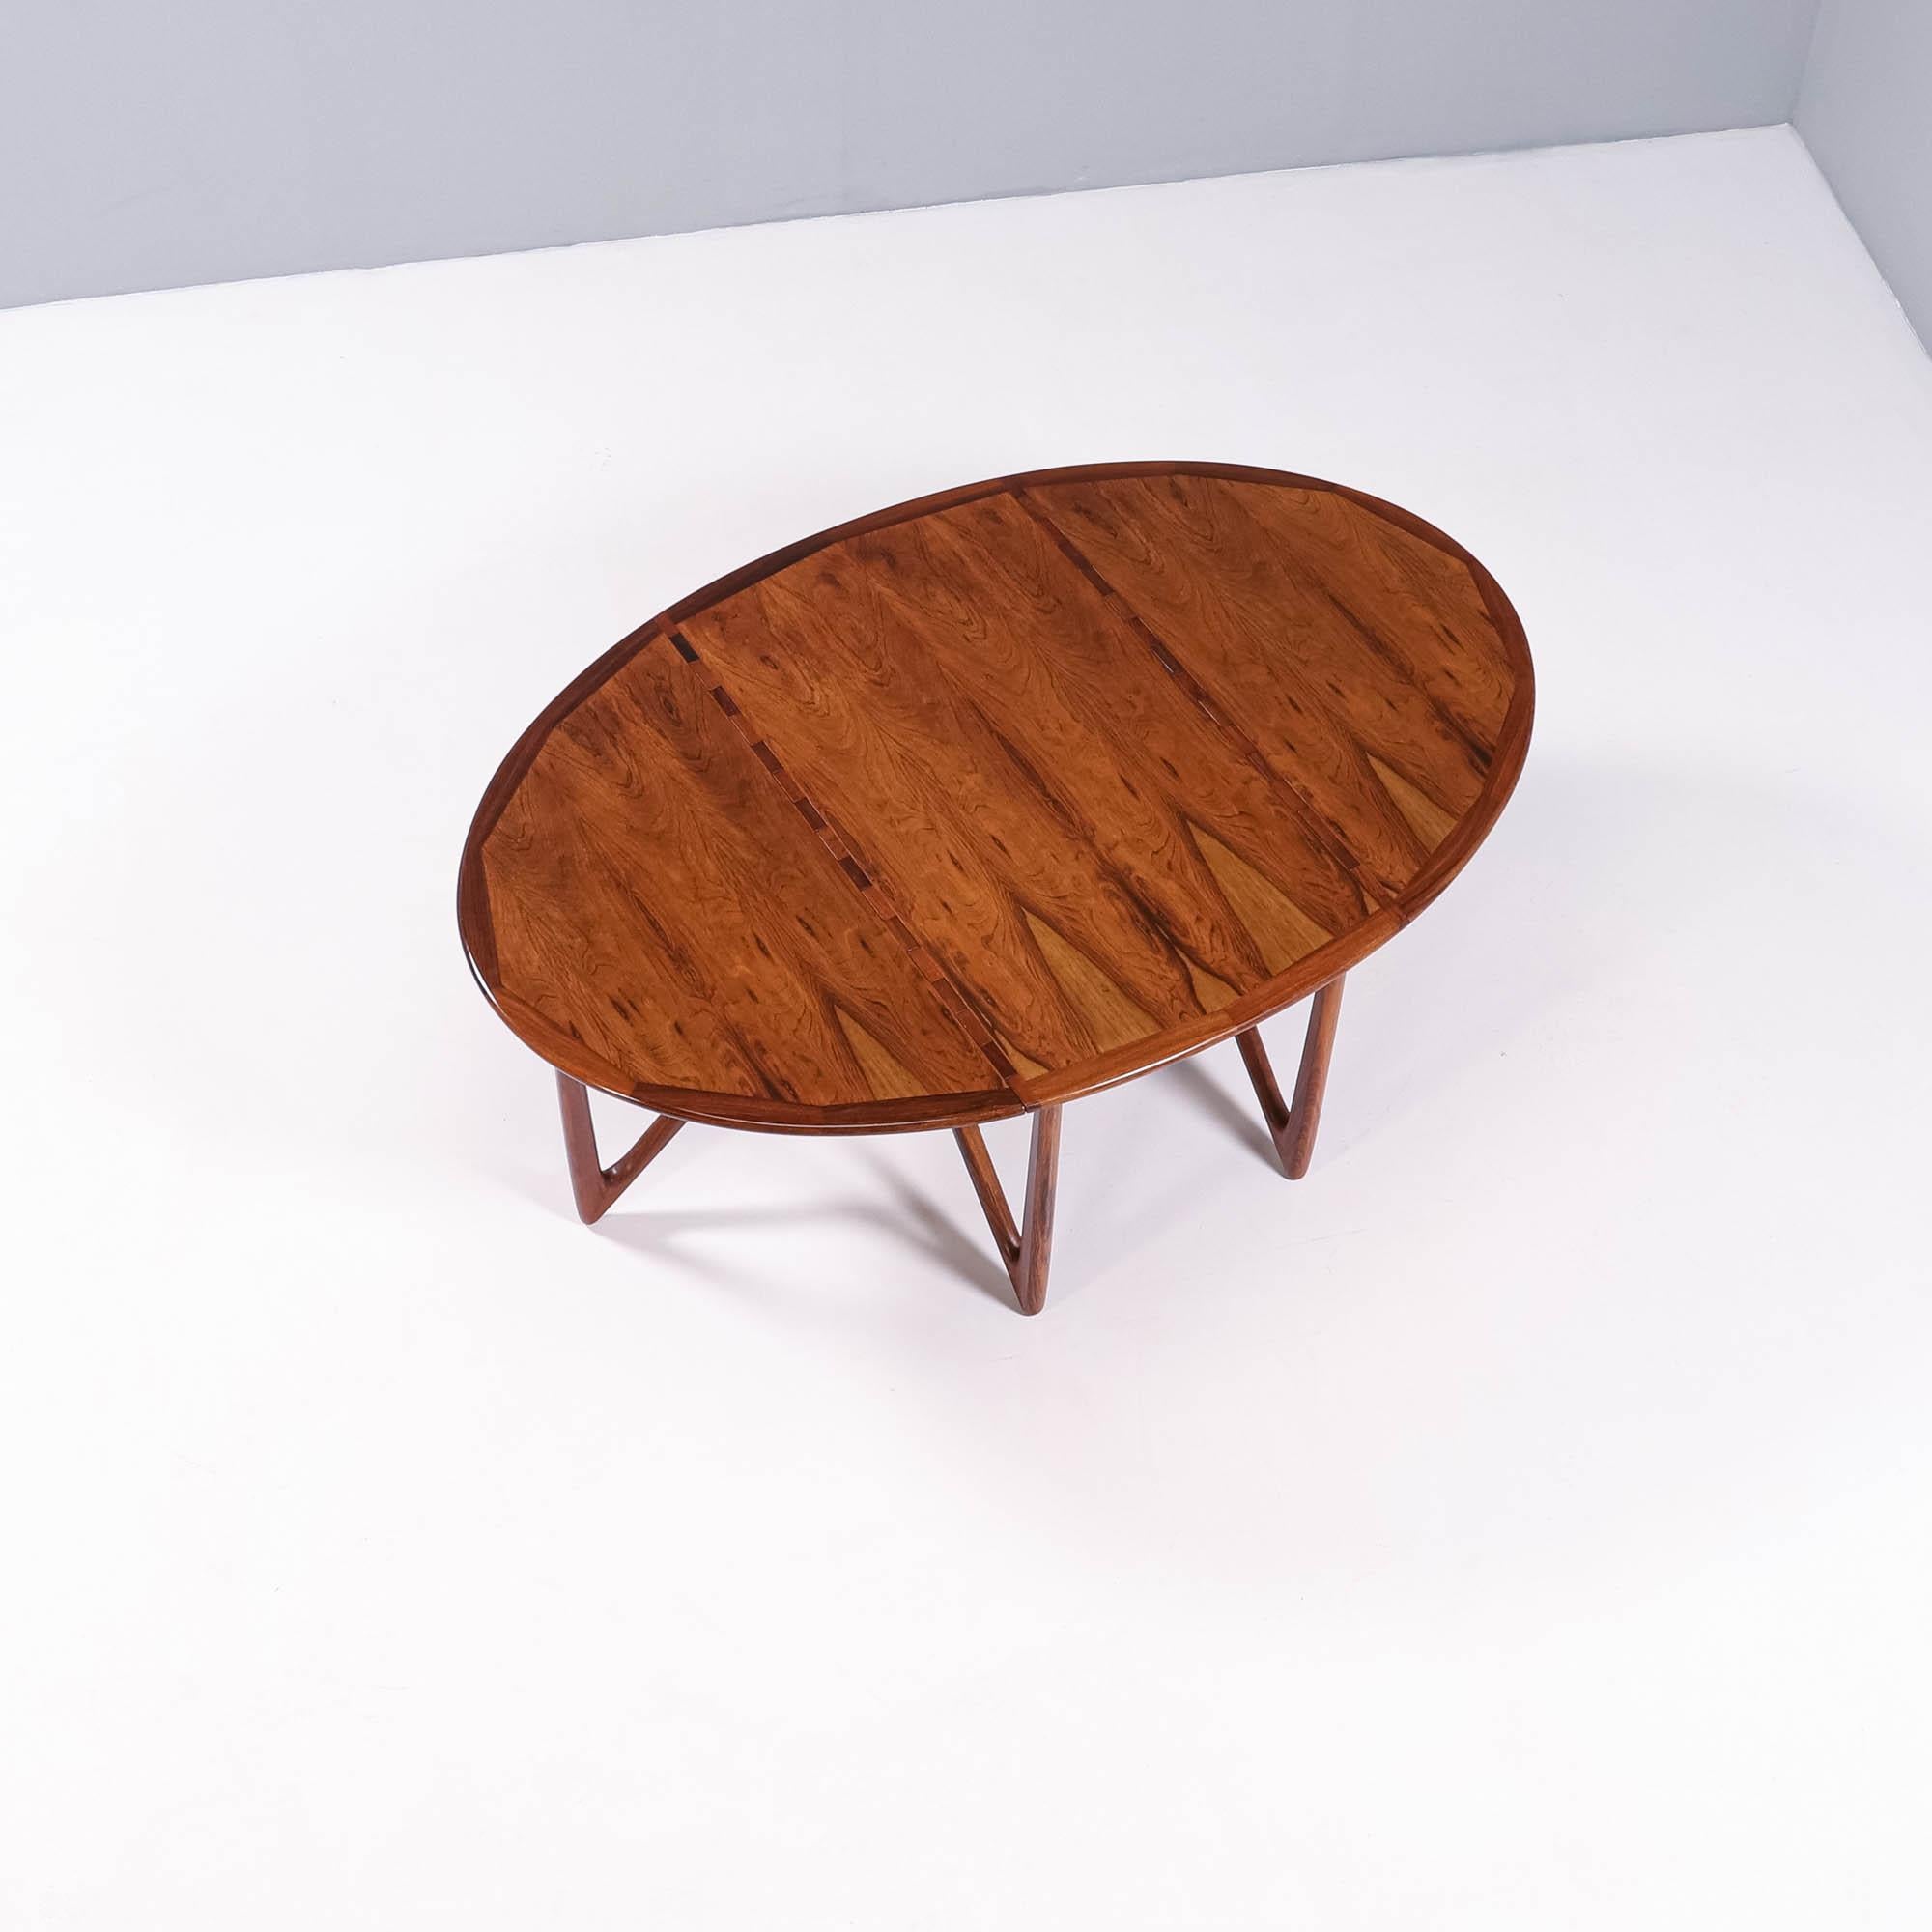 This rare drop-leaf dining table in rosewood shows an unusual, impressive base of six V-shaped legs, made with extraordinary craftsmanship and designed by Kurt Østervig for Jason Furniture in Denmark. 

The legs on both ends can be turned, which